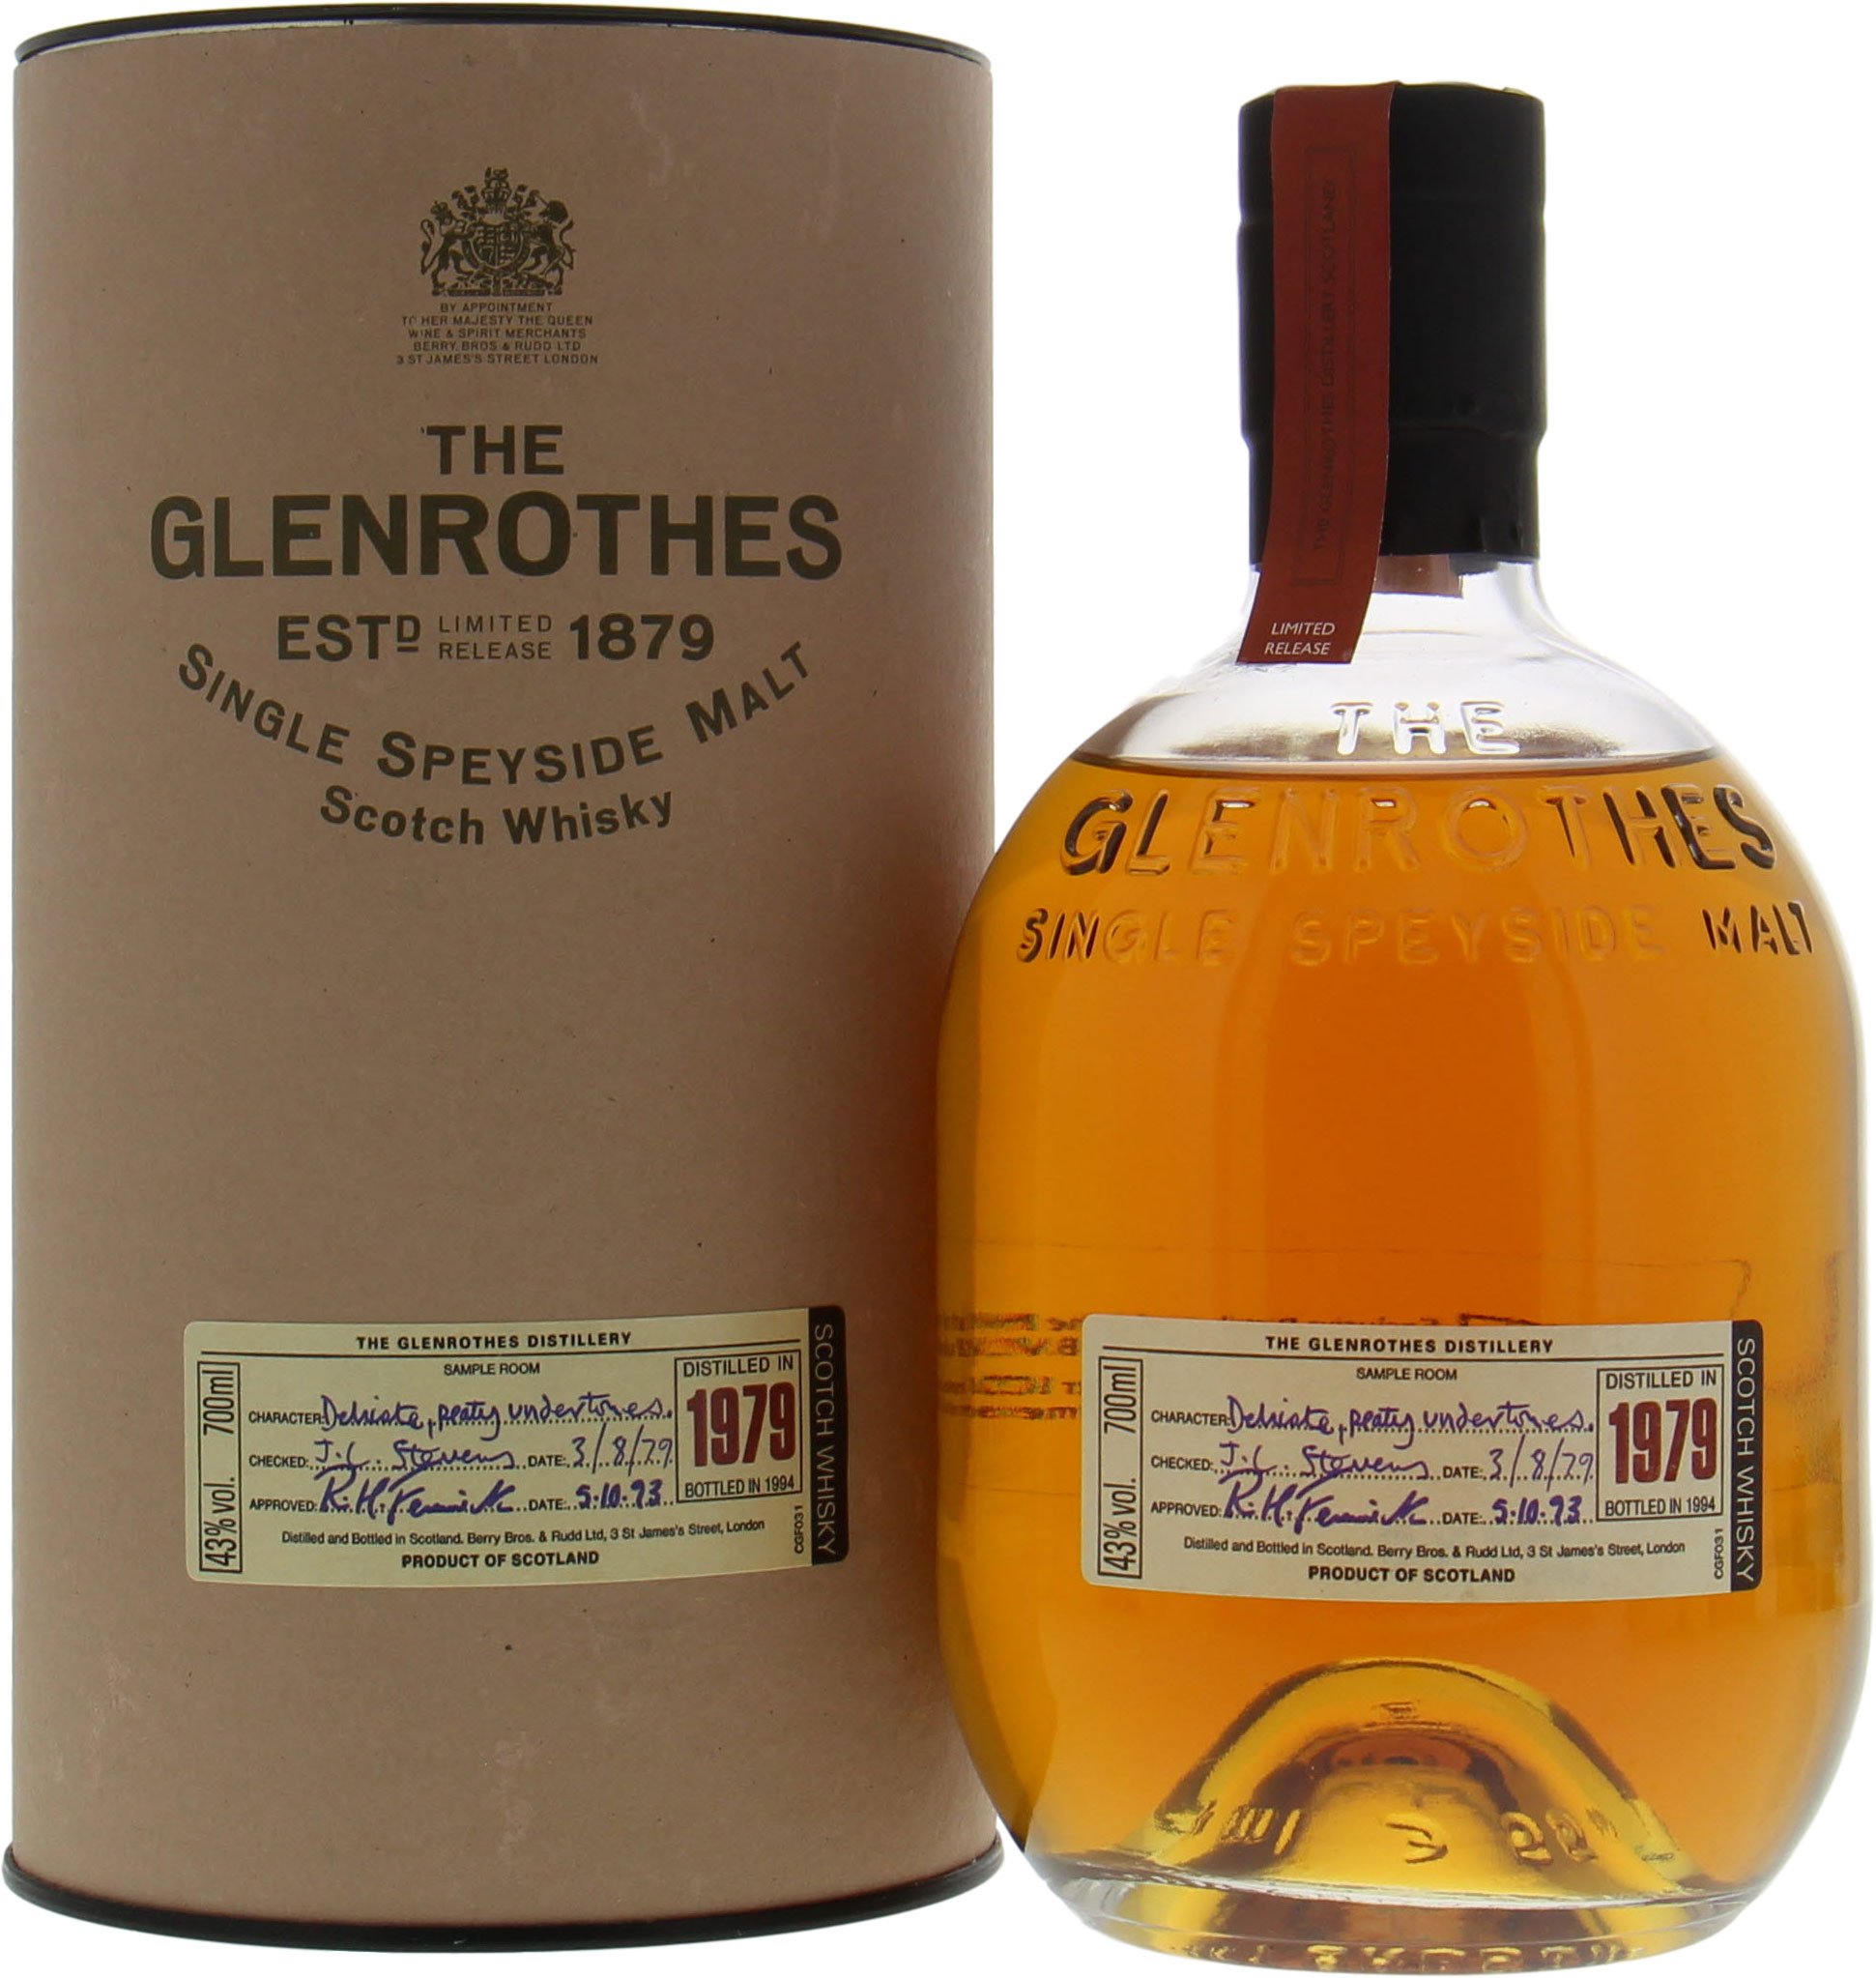 Glenrothes - 1979 Approved: 05.10.93 43% 1979 In Original Container